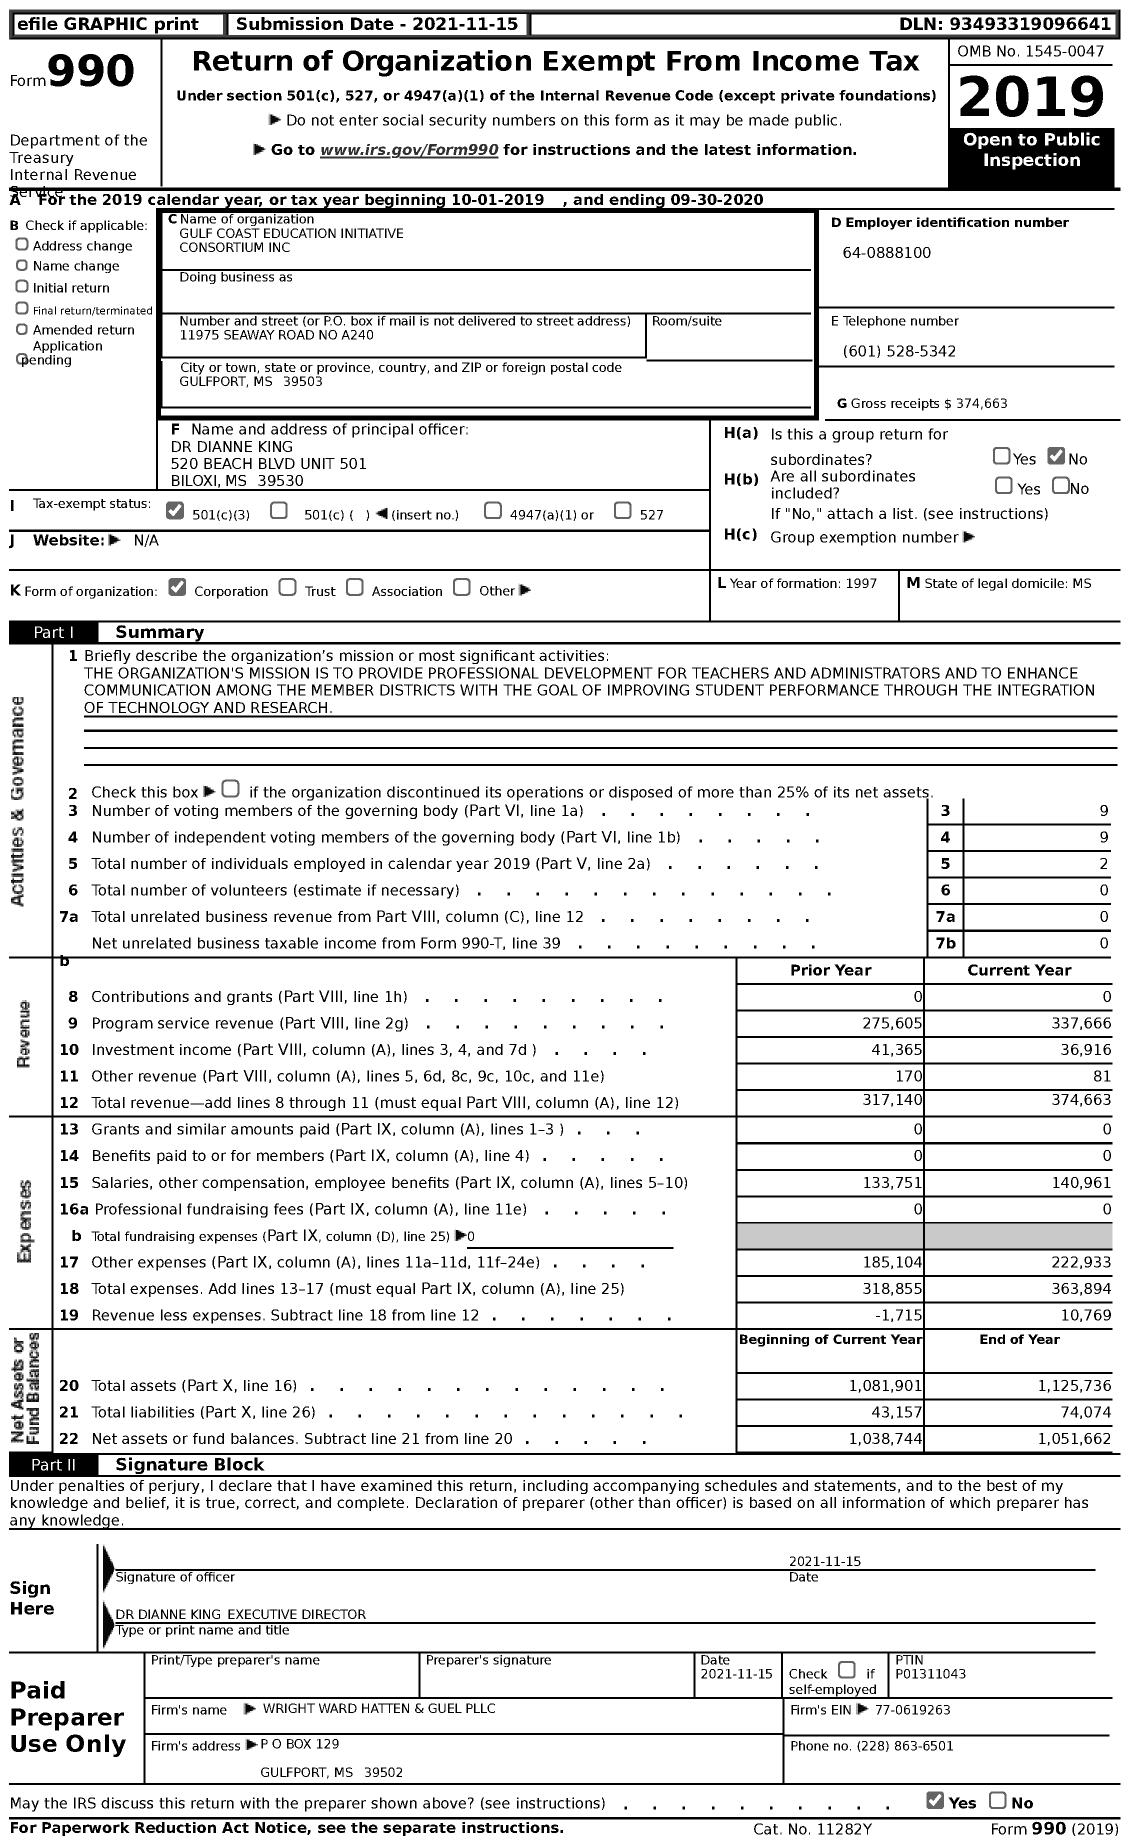 Image of first page of 2019 Form 990 for Gulf Coast Education Initiative Consortium